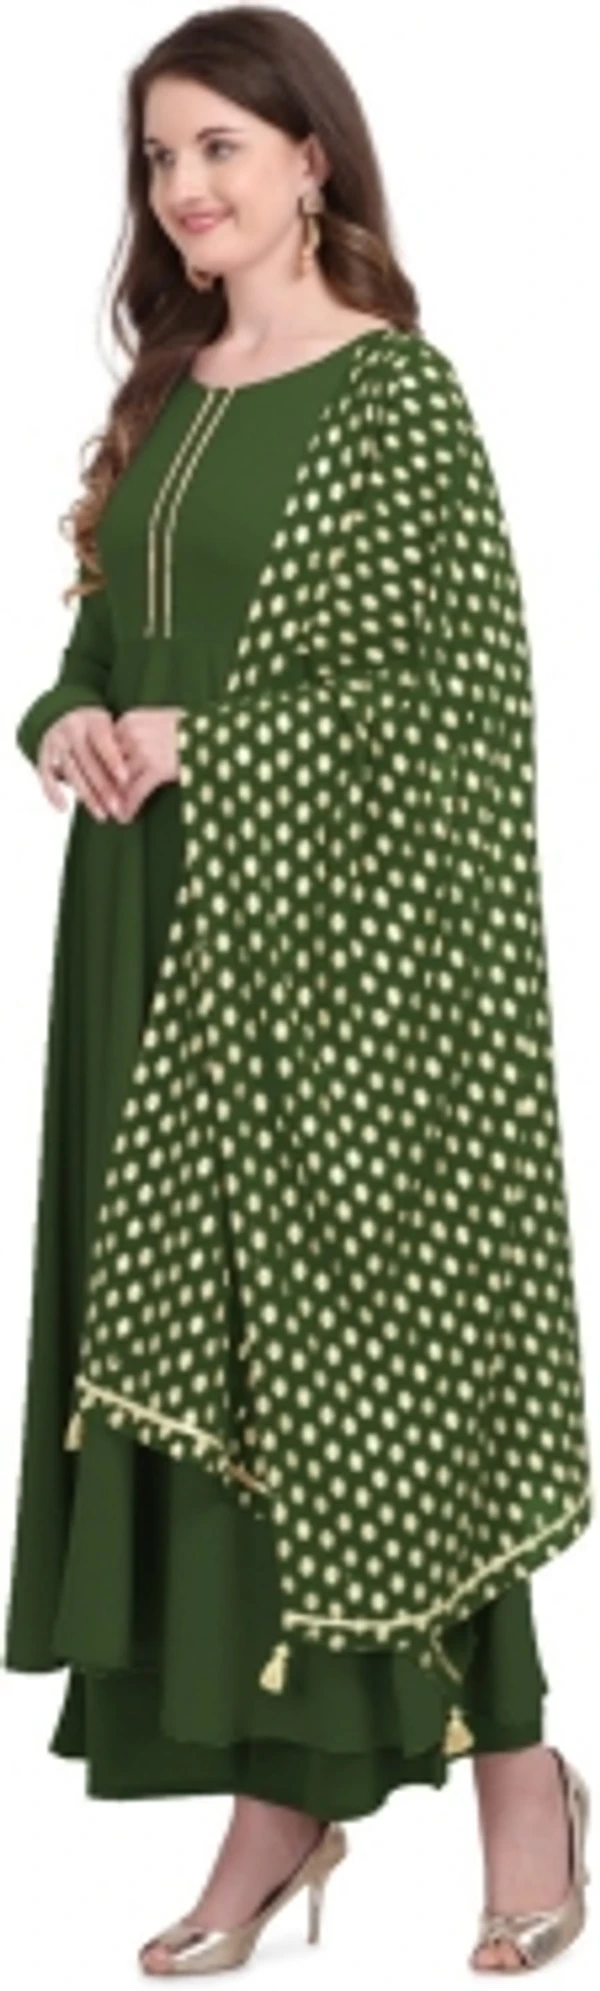 THE FAB FACTORY Women Kurta and Dupatta SetGeorgette, Crepe FabricFull SleeveSolid PatternColor: Green, GoldFor Women10 Days Return Policy, No questions asked. - M